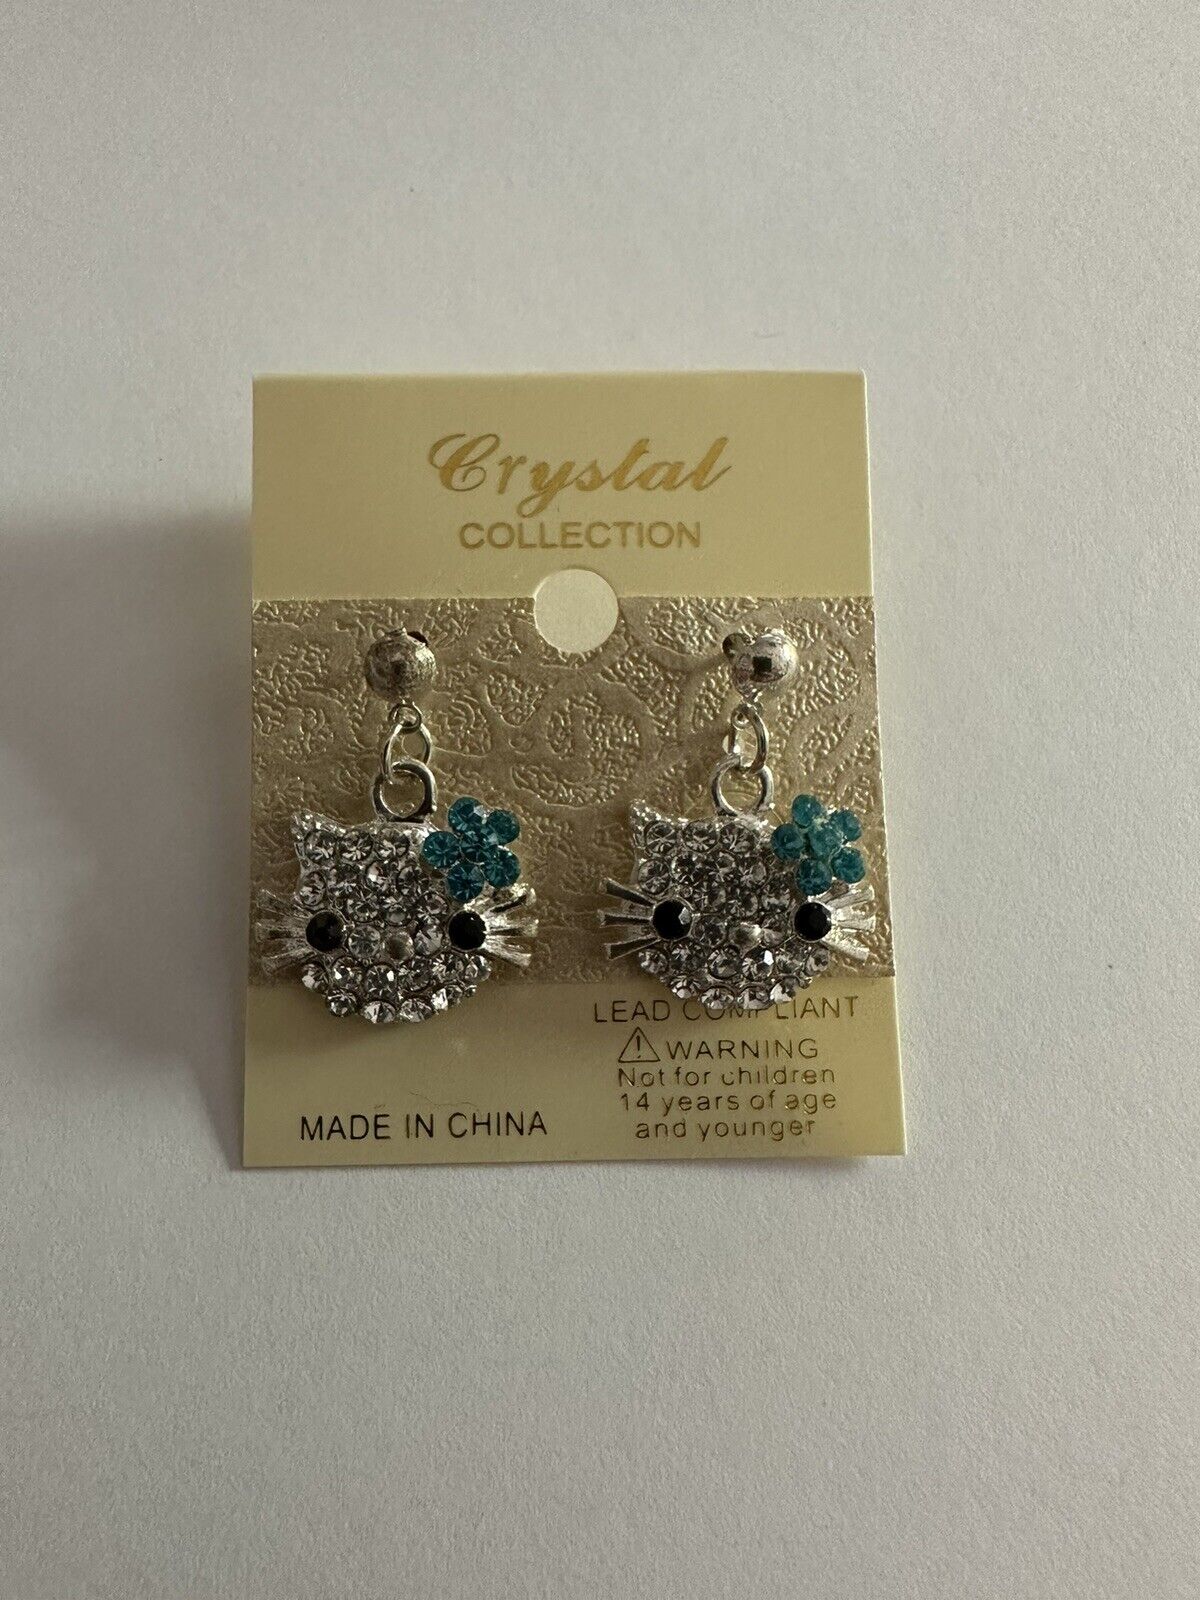 Hello Kitty Crystal Collection Brand New Earrings Jewelry Never Worn BNWT